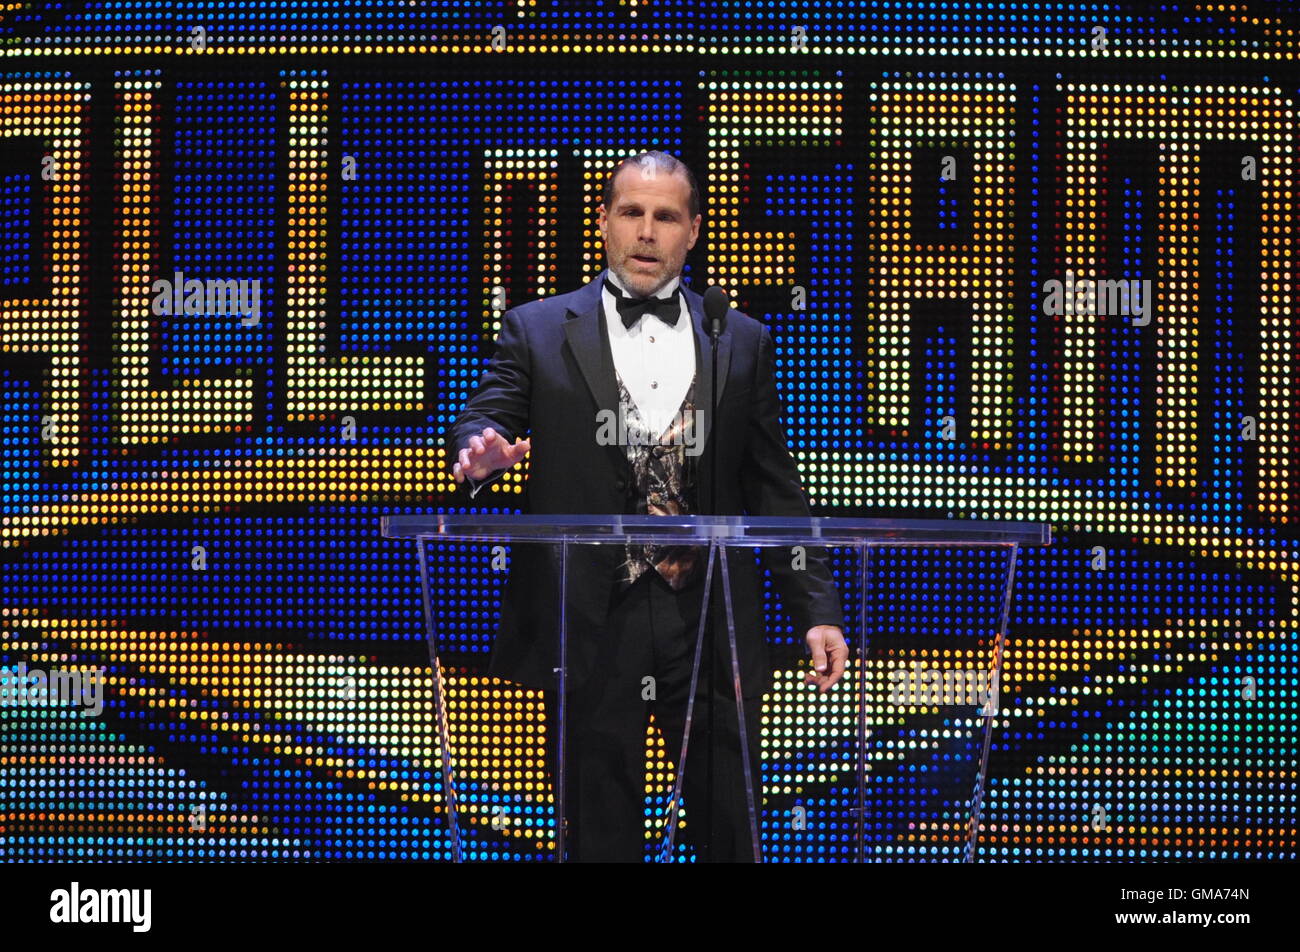 New York, NY- March 28: Shawn Michaels attends the 2015 WWE Hall Of Fame on  March 28, 2015 at the SAP Center in San Jose, California. (C) George  Napolitano/ MediaPunch Stock Photo - Alamy